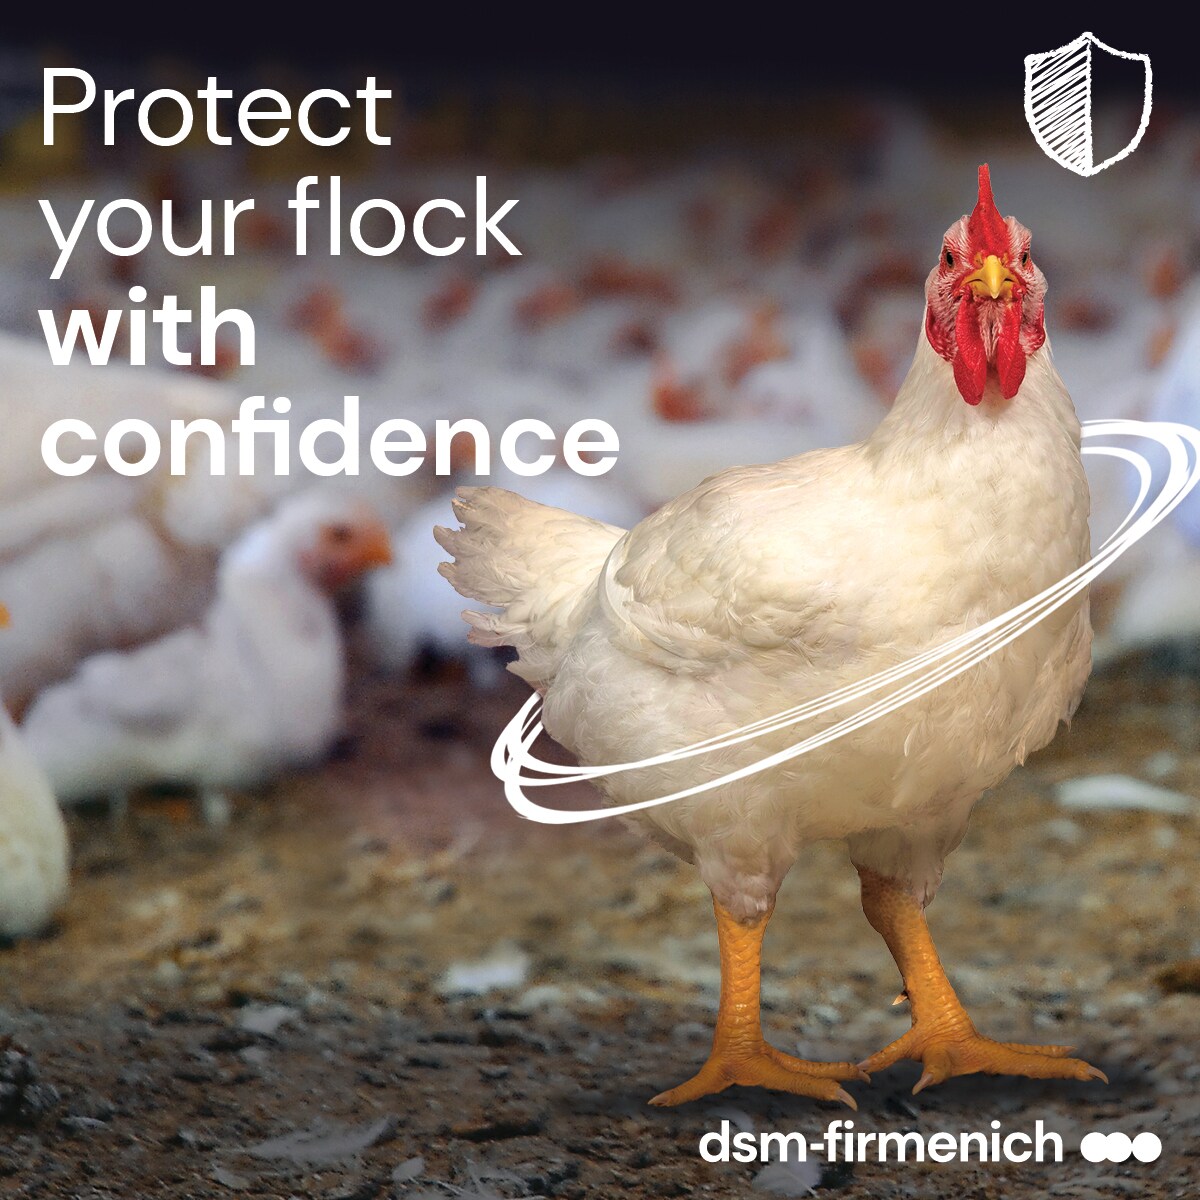 Protect your flock with confidence